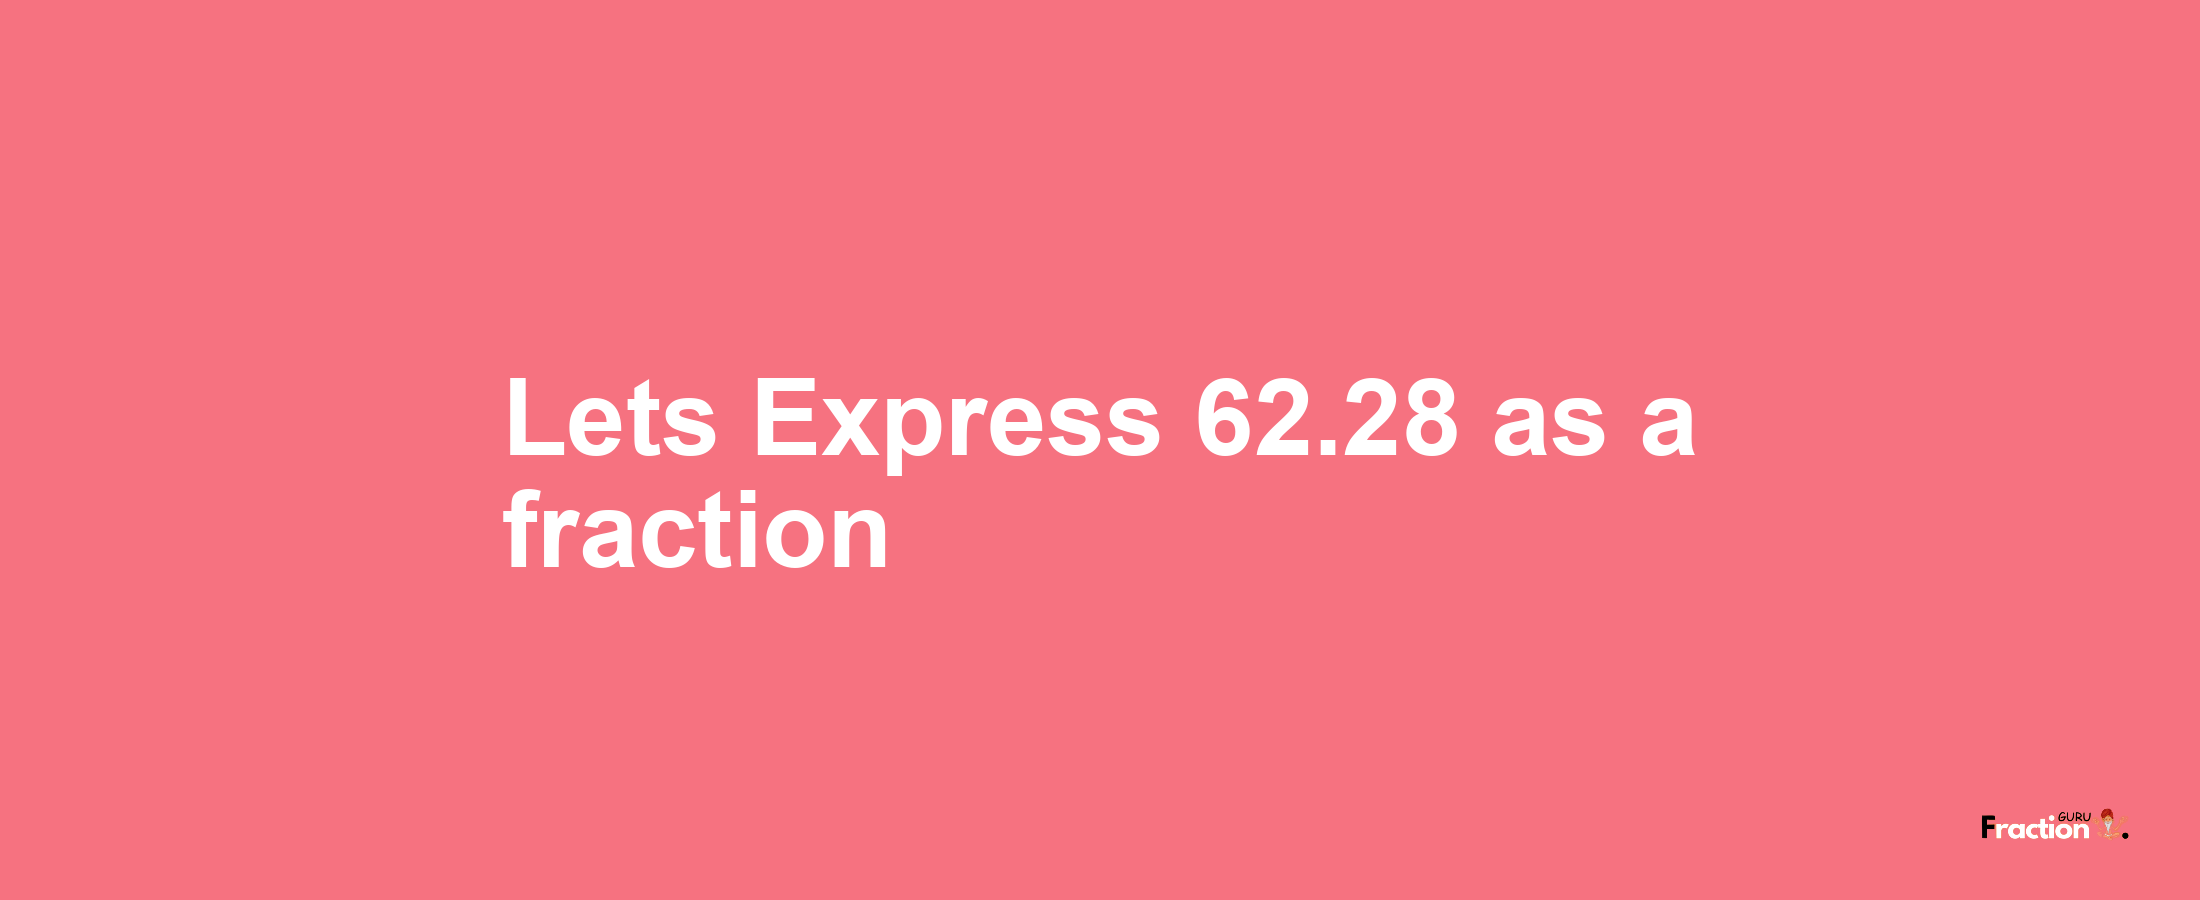 Lets Express 62.28 as afraction